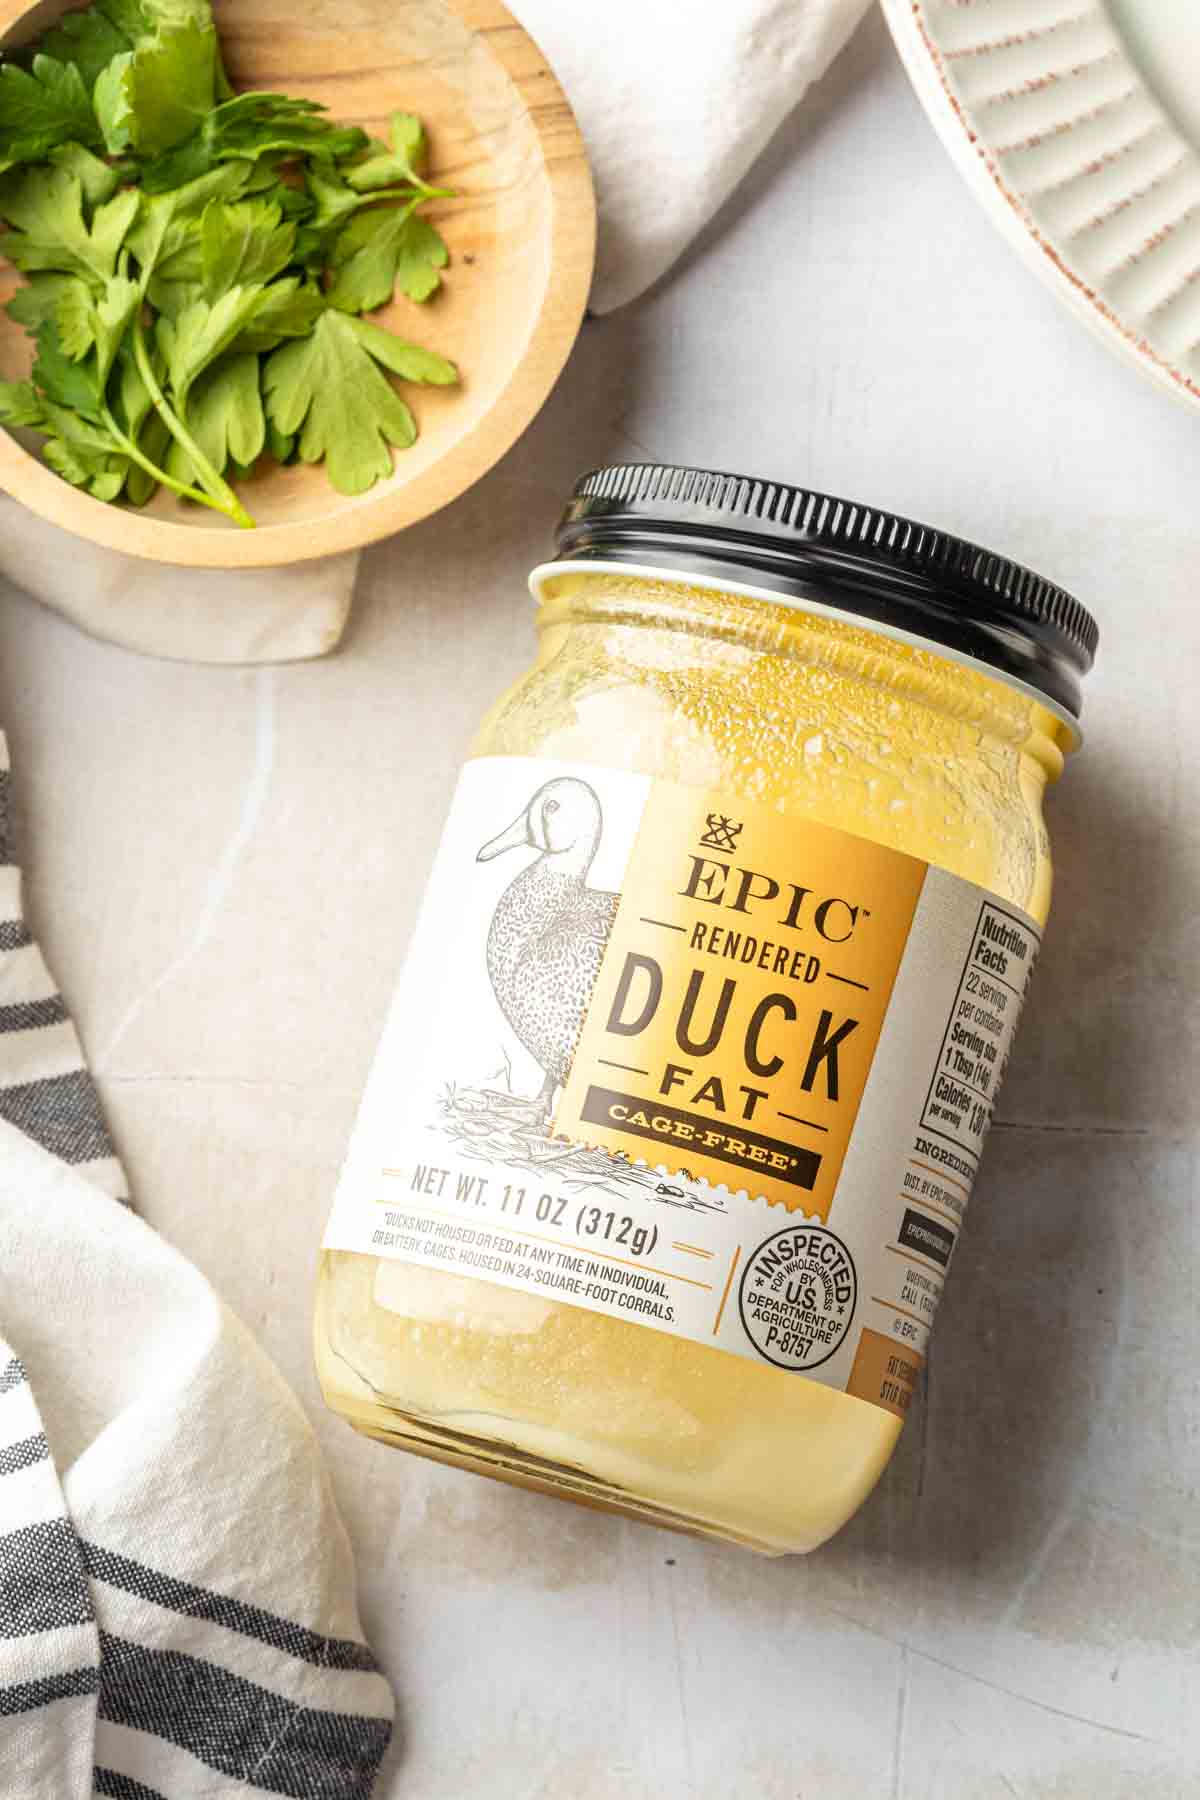 A jar of rendered duck fat. 